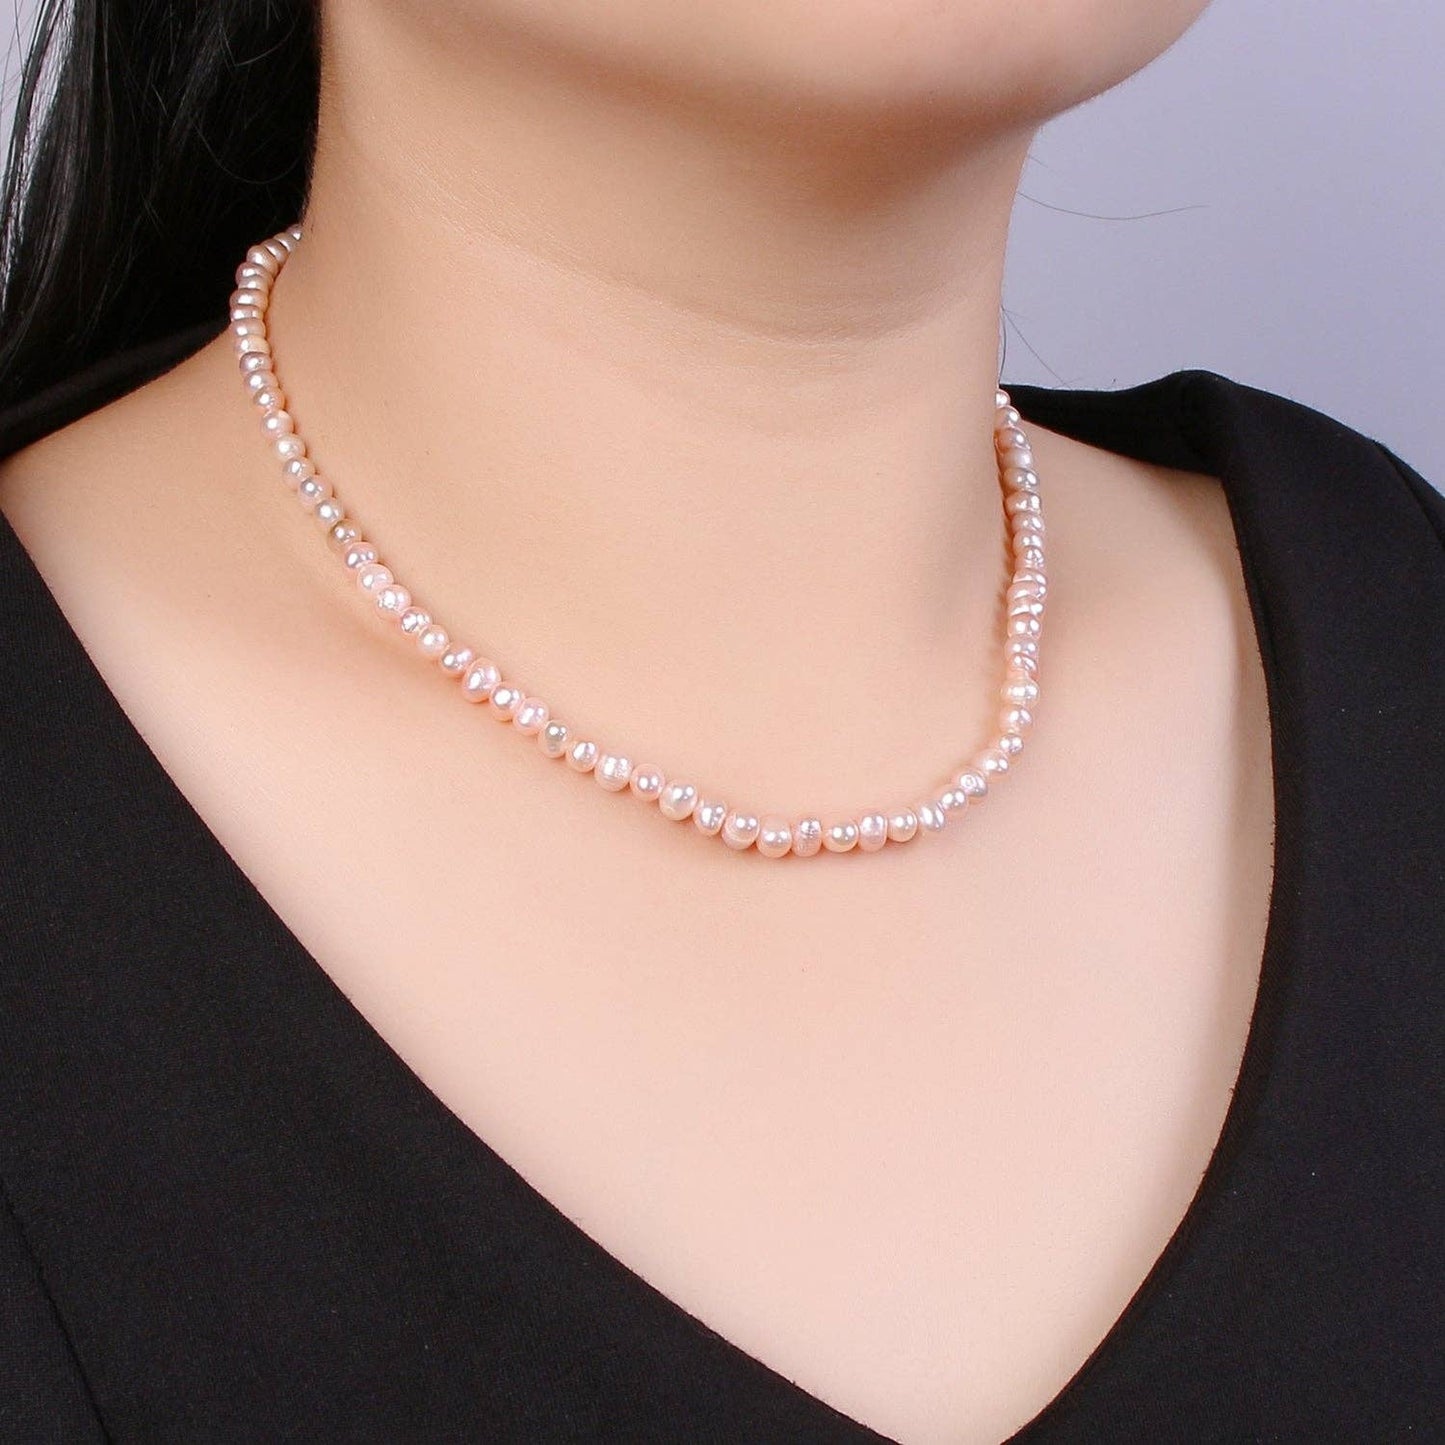 2mm Pink Freshwater Pearl 15 Inch Choker Necklace w. Extender